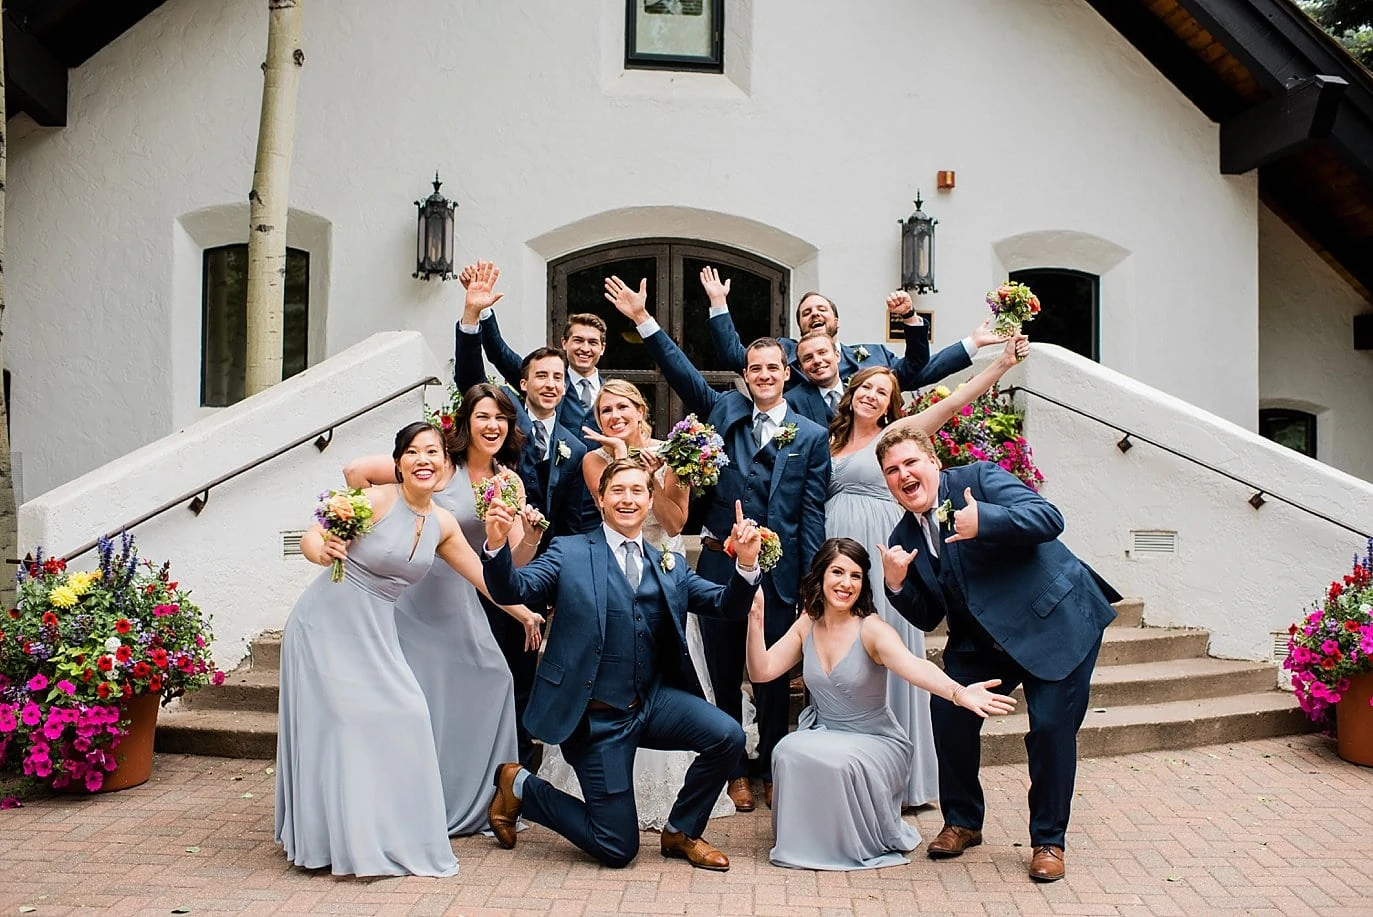 Bridal party at Vail Interfaith Chapel by Avon wedding photographer Jennie Crate